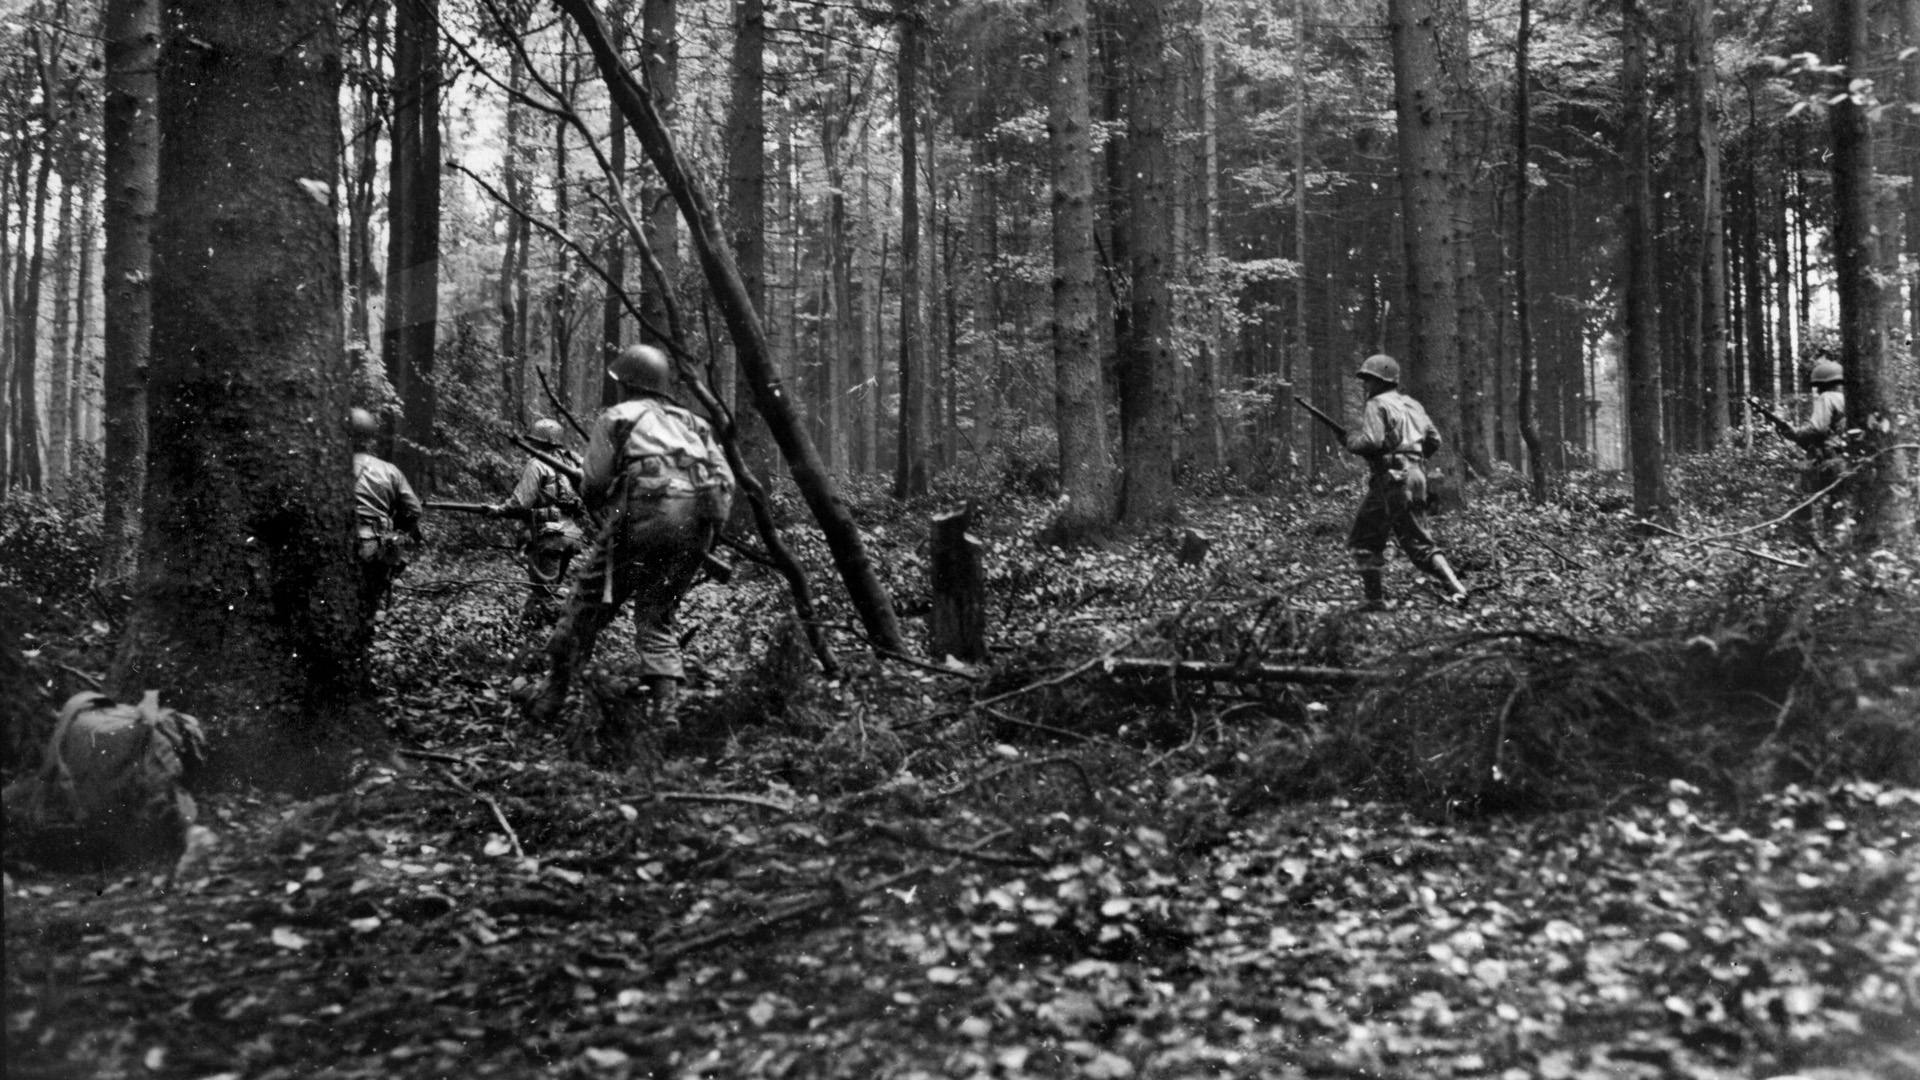 Members of Tom Myers’s 110th Infantry cautiously move through the “green hell” of the Hürtgen Forest, November 2, 1944.